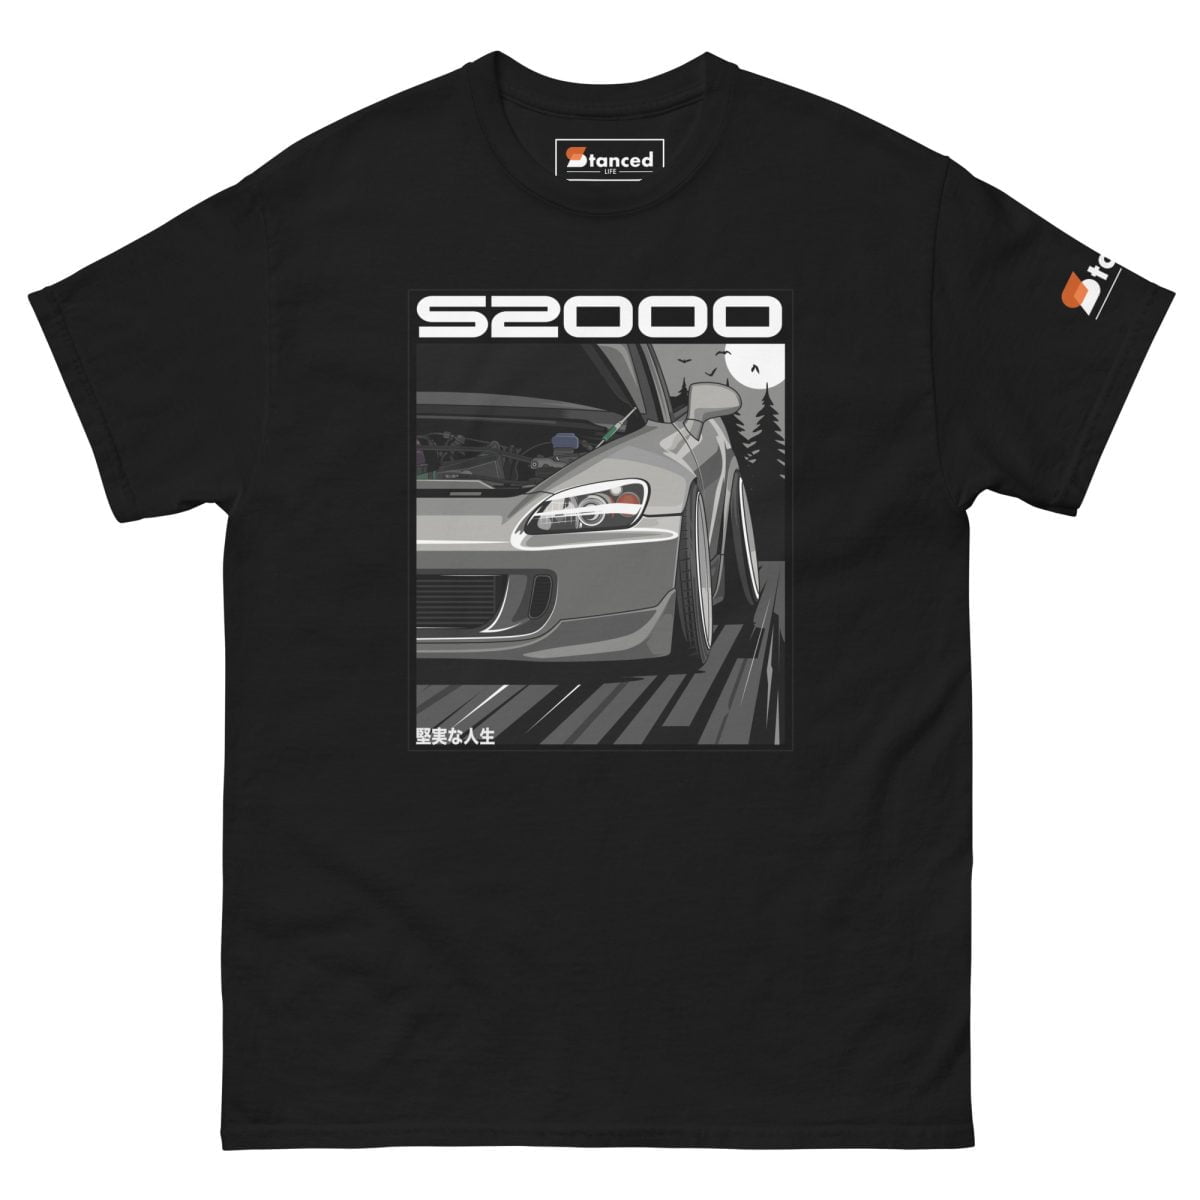 A Honda S2000 Mens Graphic T shirt featuring the iconic Honda S2000 | StancedLife